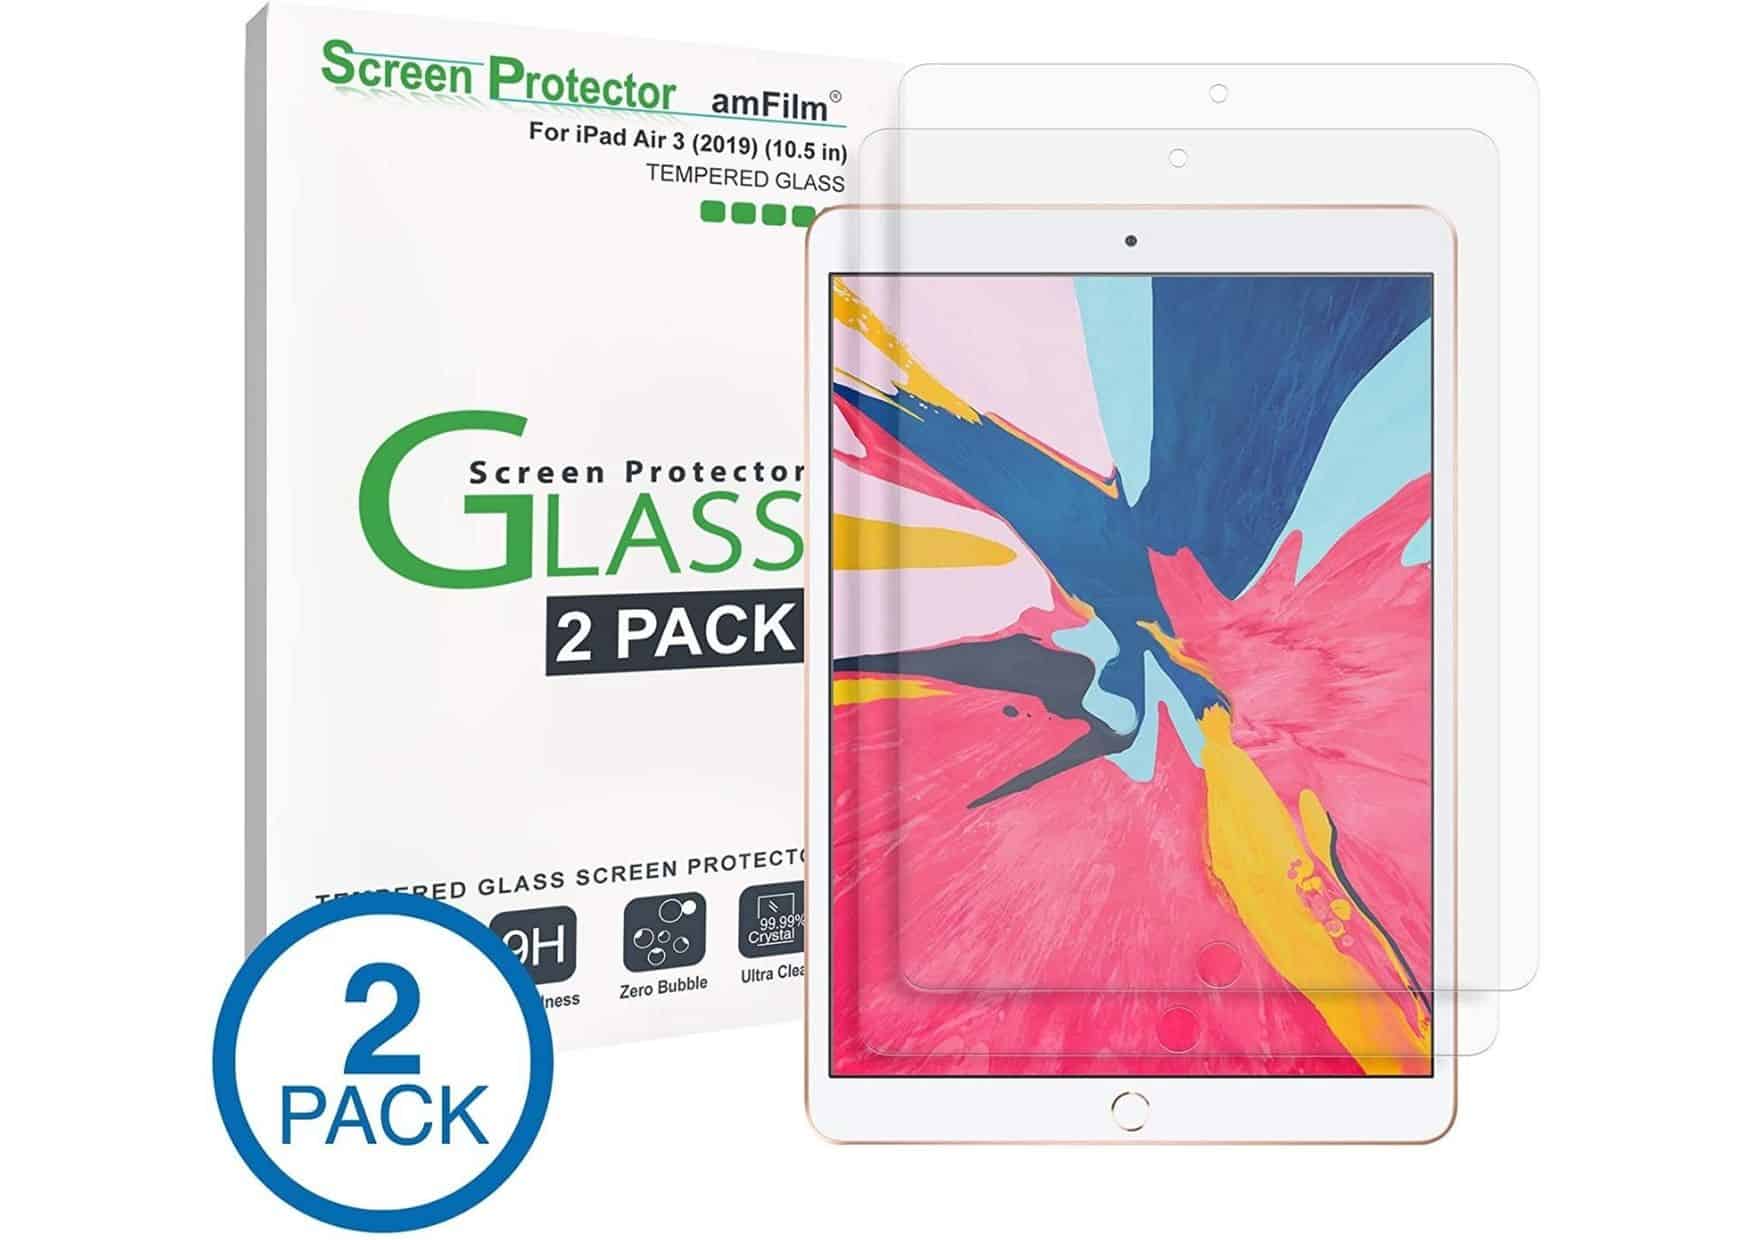 2 Pack and Compatible with Apple Pencil amFilm Glass Screen Protector for iPad 10.2 7th Generation, 2019 Tempered Glass Screen Protector with Camera Cutout 